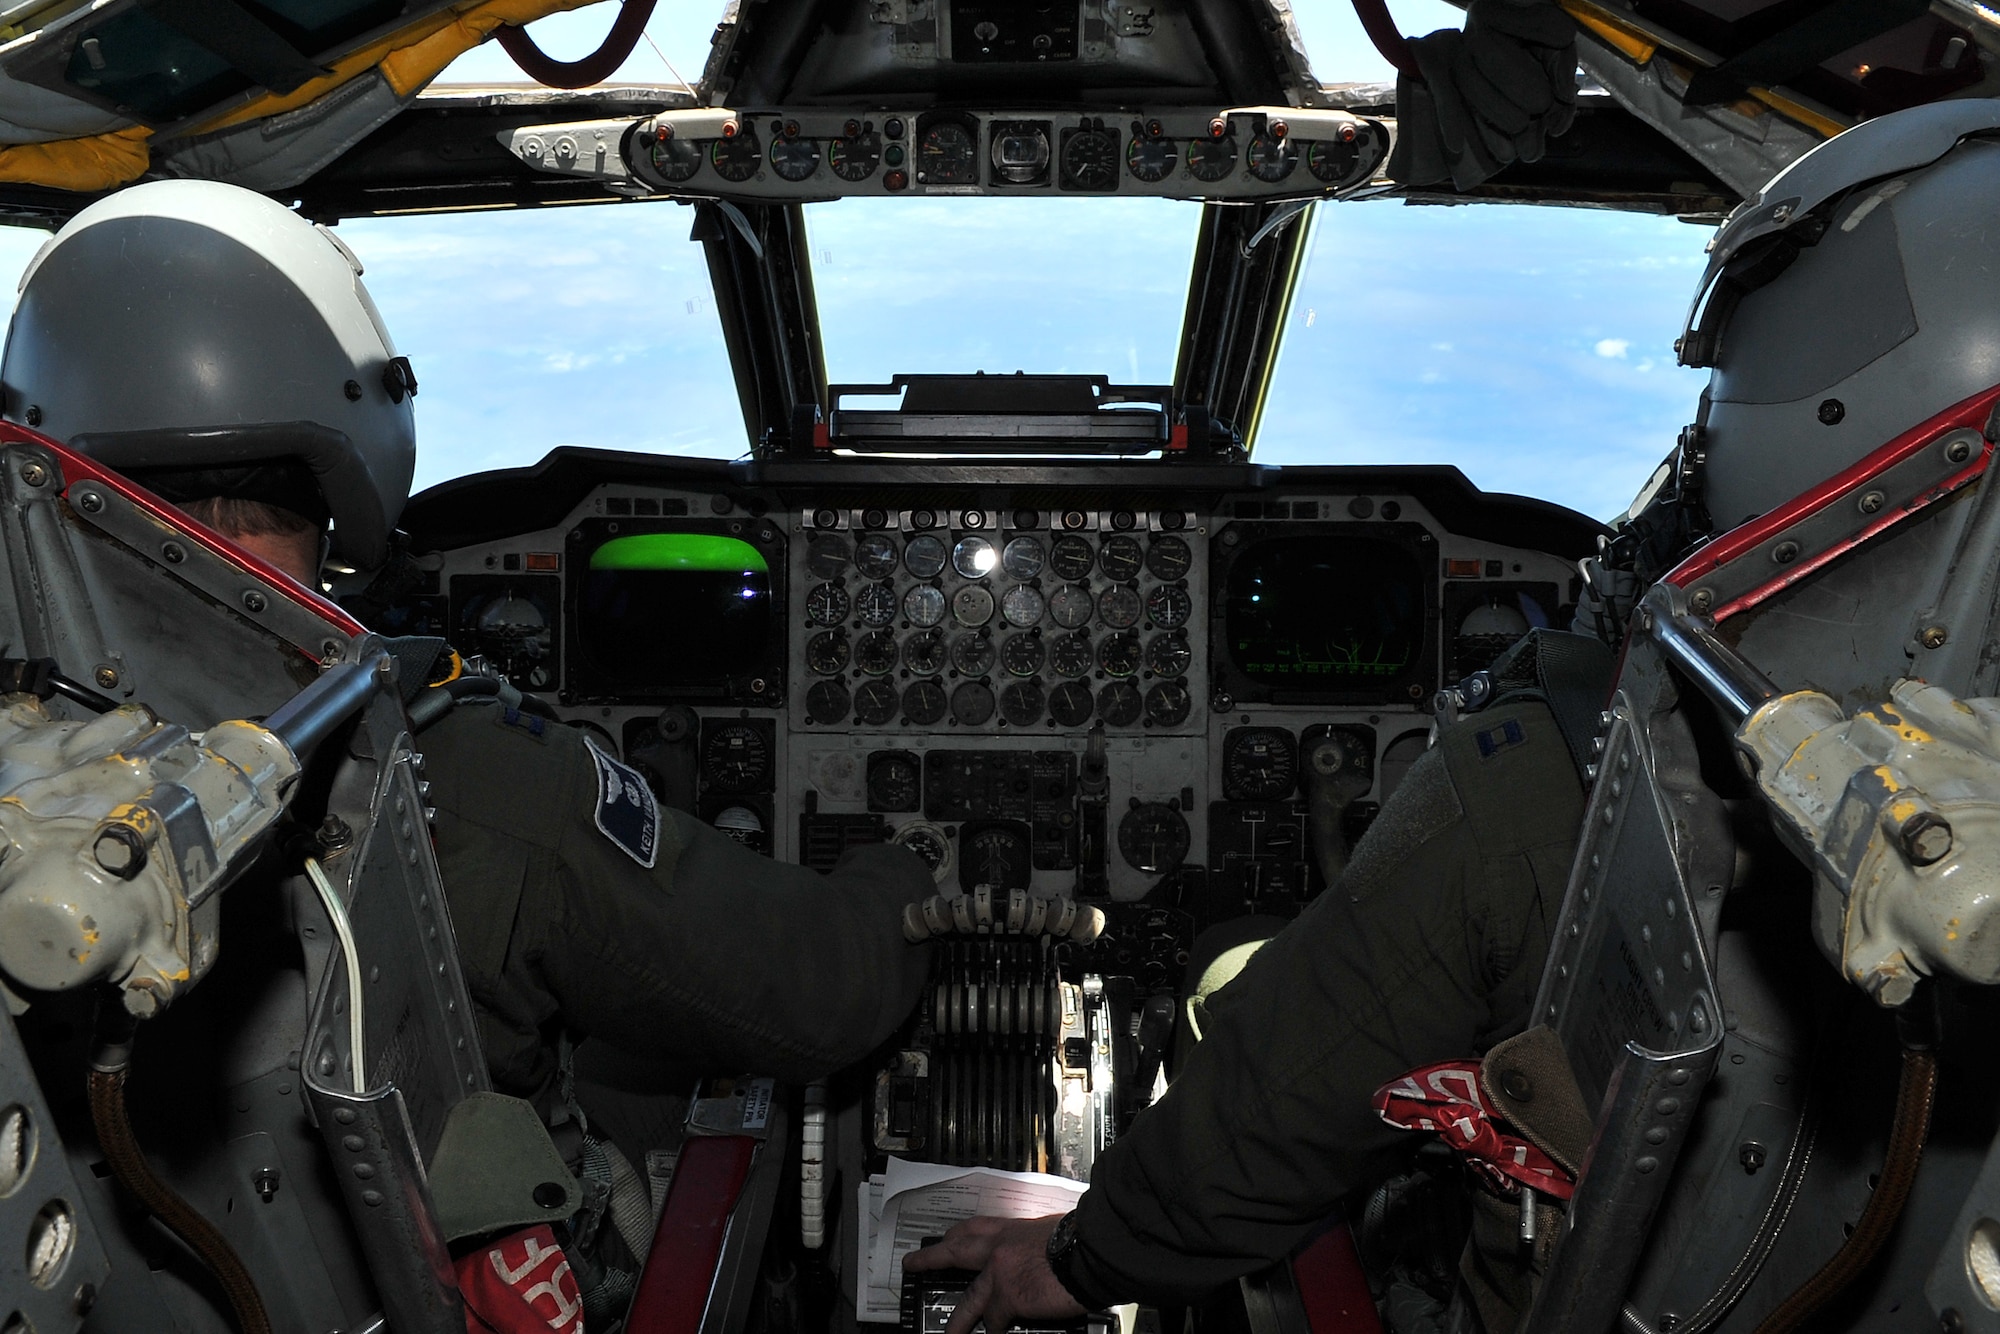 Capt. Keith Vandagriff, 20th Expeditionary Bomb Squadron pilot, and Capt. Shane Dow, 20th EBS co-pilot, fly a B-52H Stratofortress during a training mission in the Asia-Pacific region April 15, 2015. The B-52 crews are deployed from Barksdale AFB, La., to Andersen AFB, Guam, in support of U.S. Pacific Command’s Continuous Bomber Presence to strengthen regional security and stability. (U.S. Air Force photo by Staff Sgt. Melissa B. White/Released)